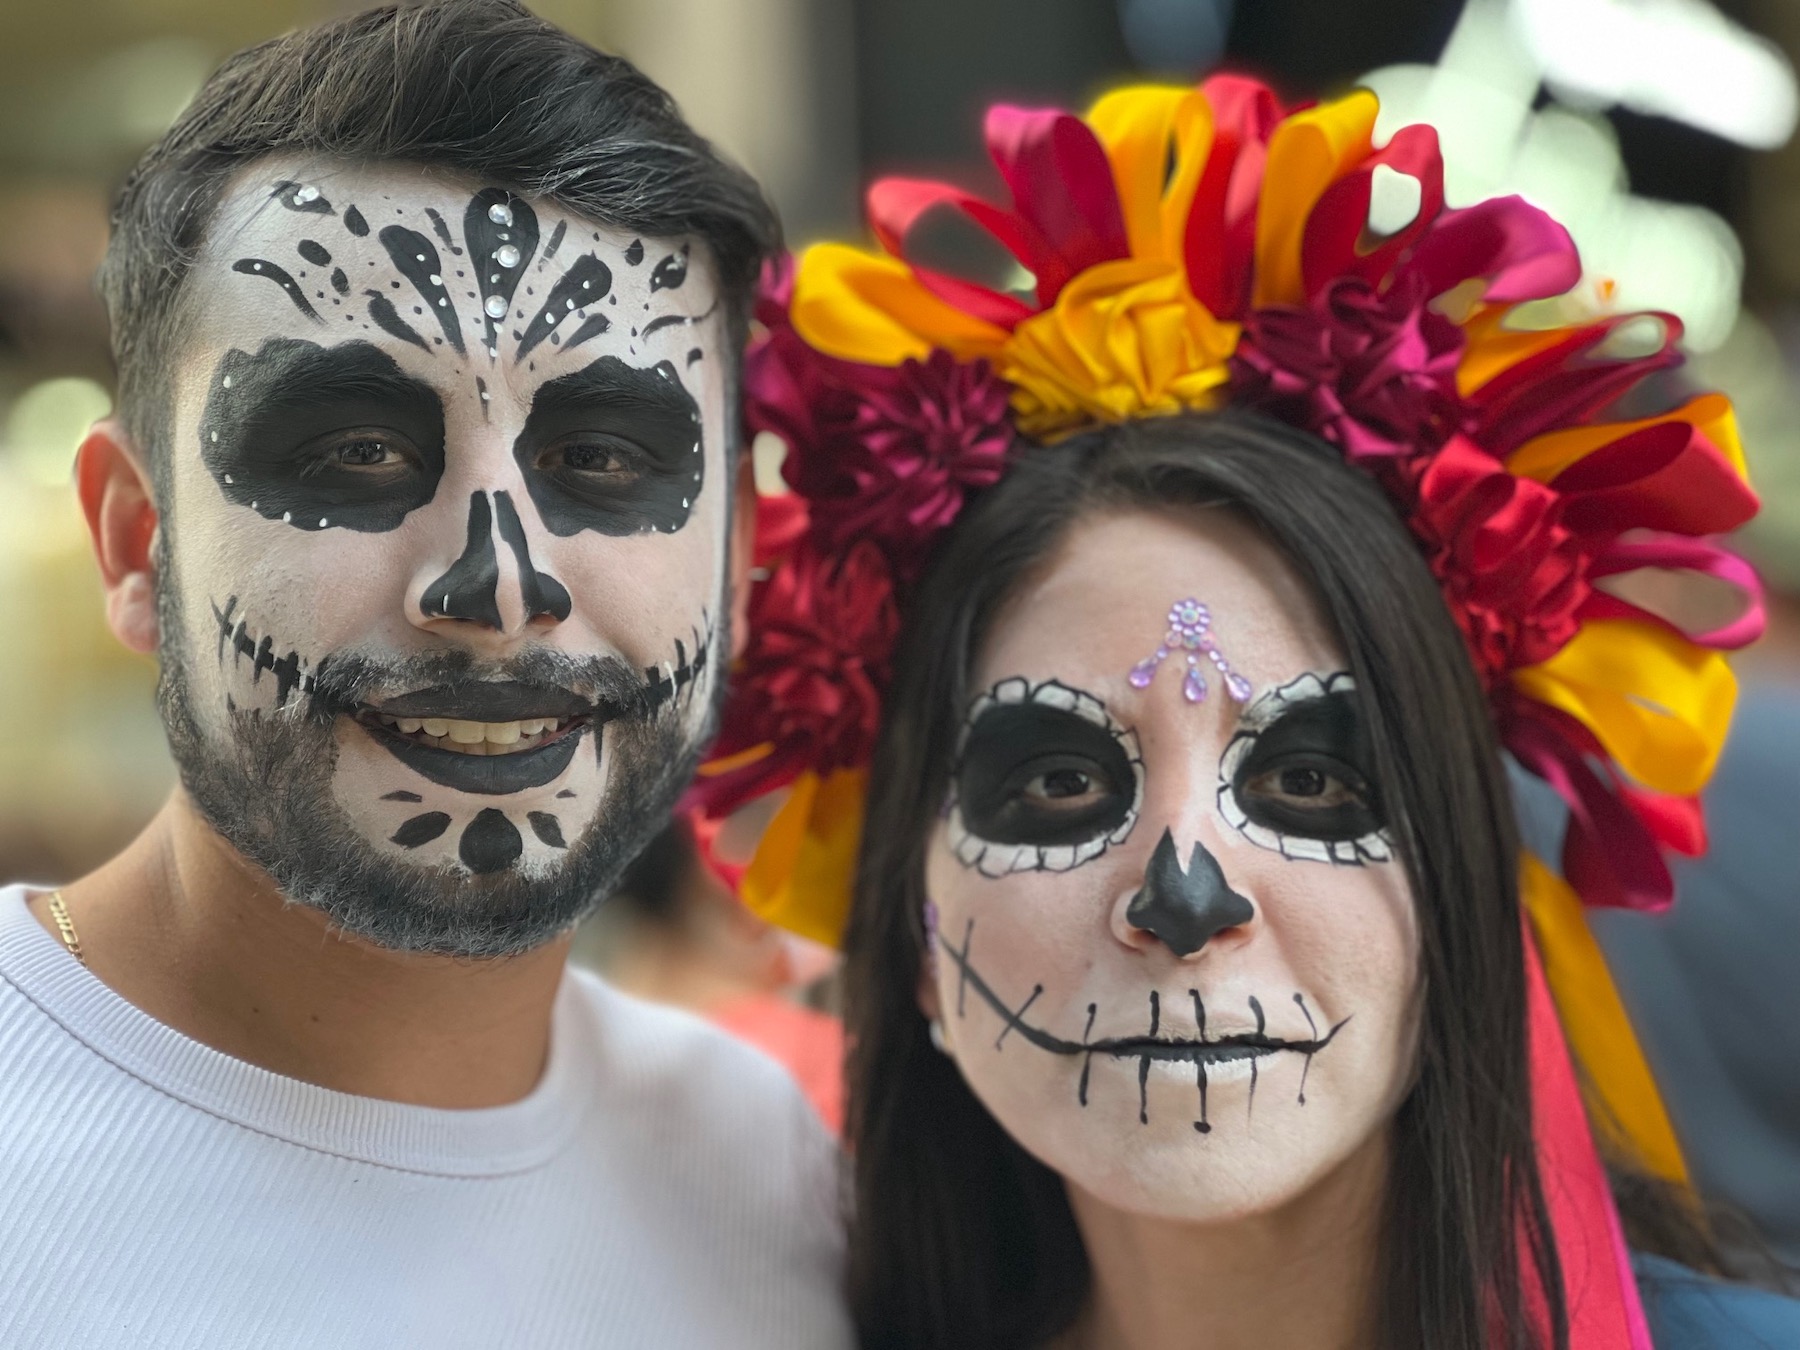 Portrait of two young people dressed for Dia de los Muertos festivities in Mexico City.